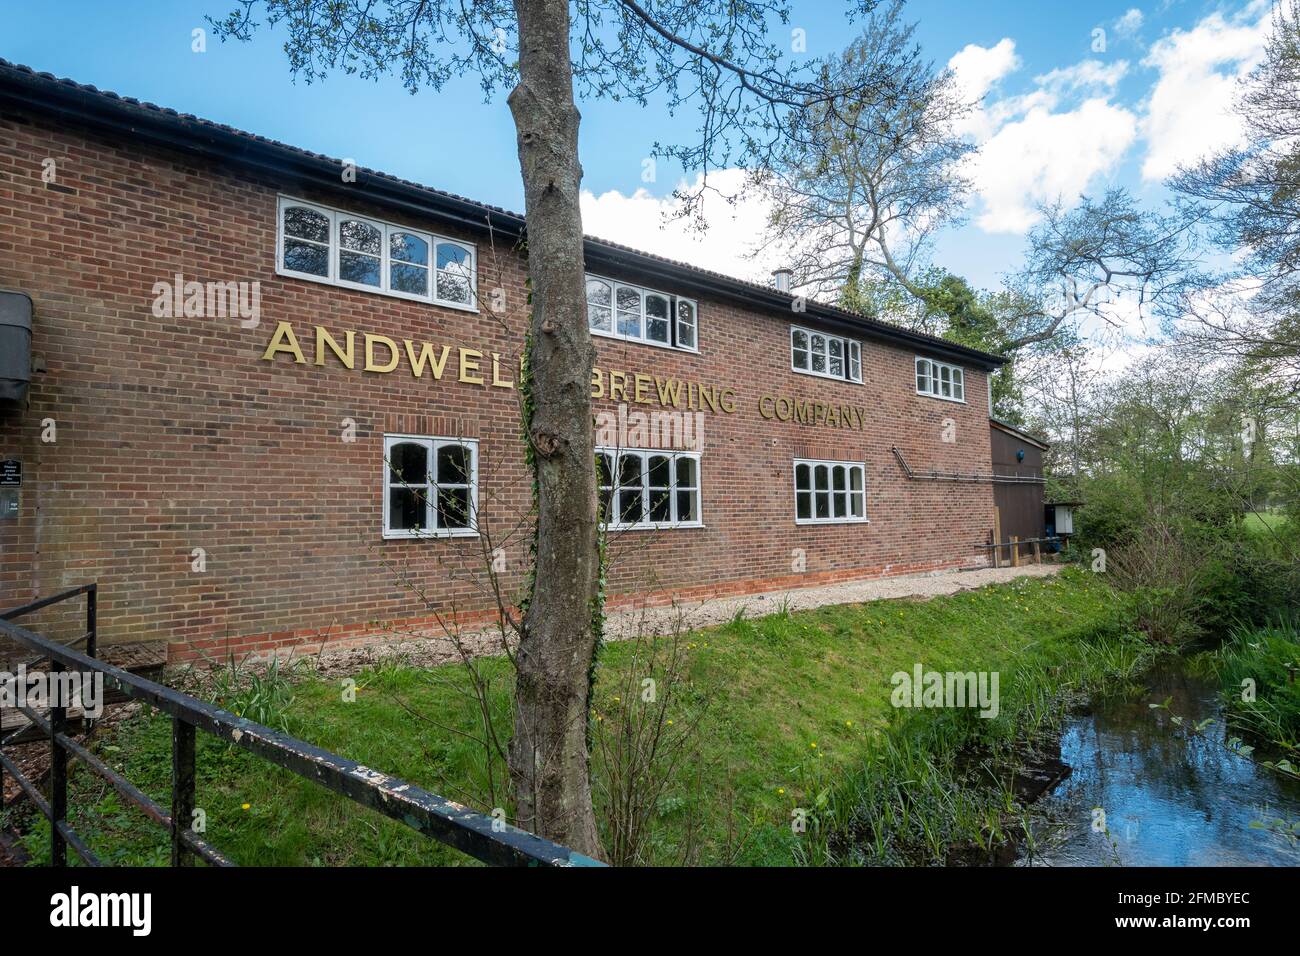 Andwell Brewing Company, a micro brewery along the riverside in the hamlet of Andwell in Hampshire, England, UK Stock Photo